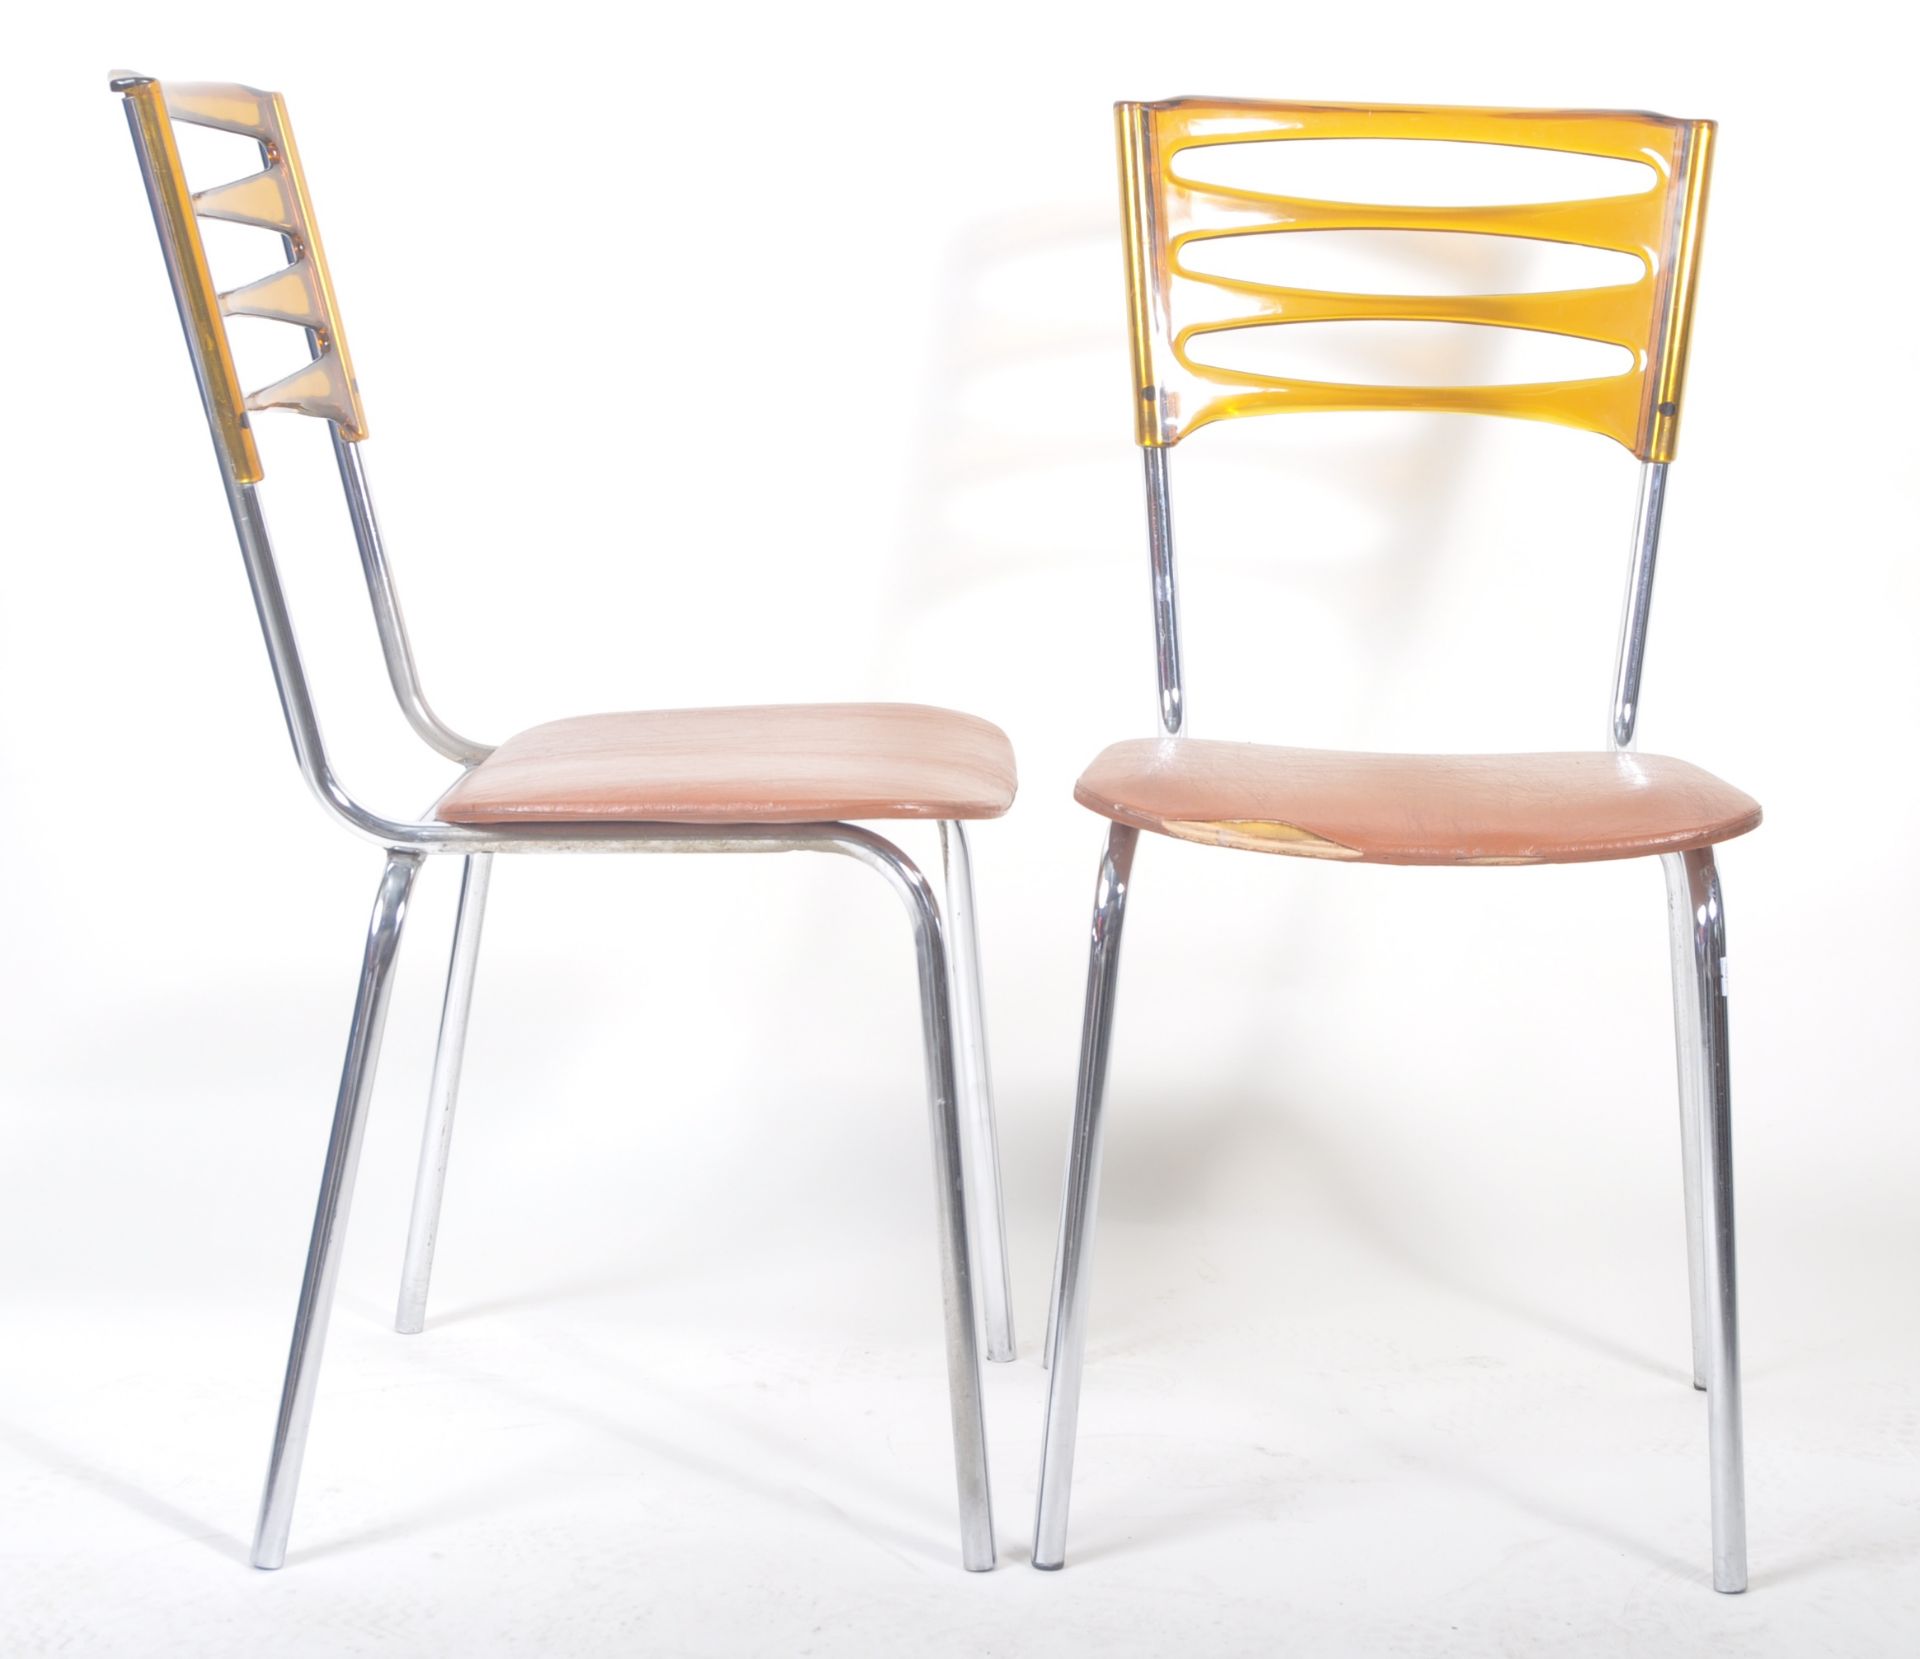 KERON - SET OF FOUR 1970'S STACKING DINING CHAIRS - Image 4 of 5